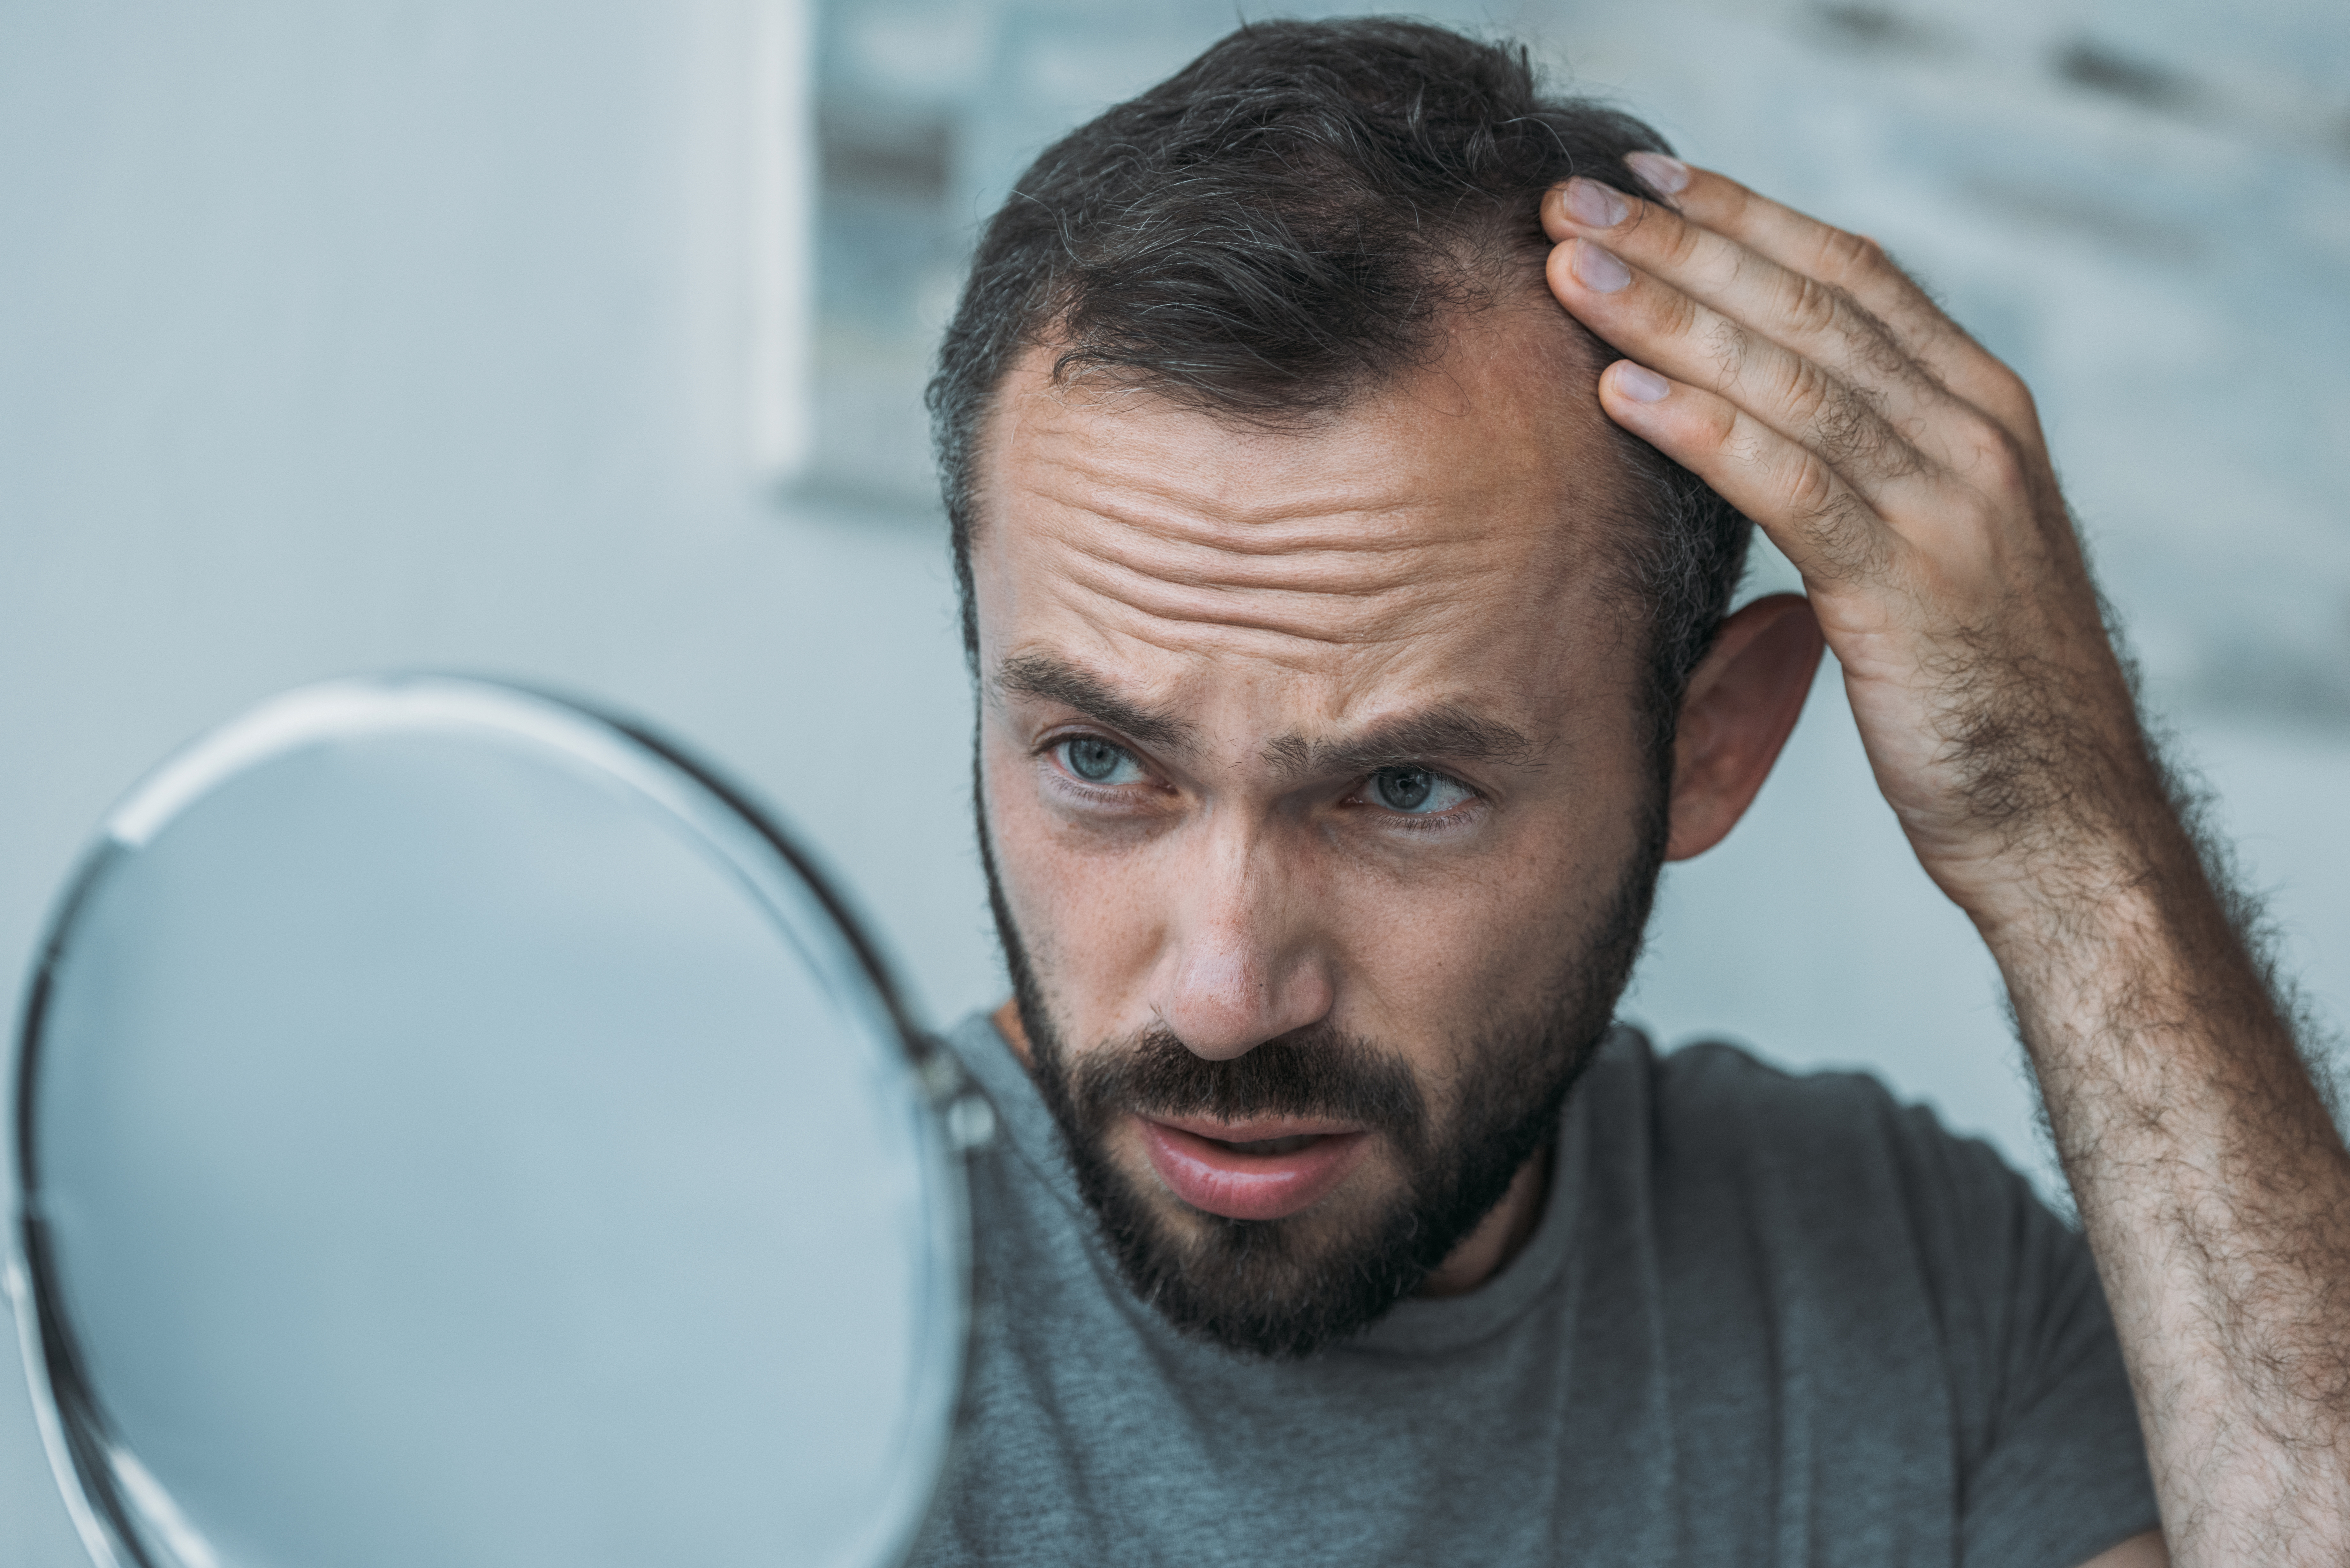 scientists may have found permanent cure for baldness that could help men suffering from hair loss